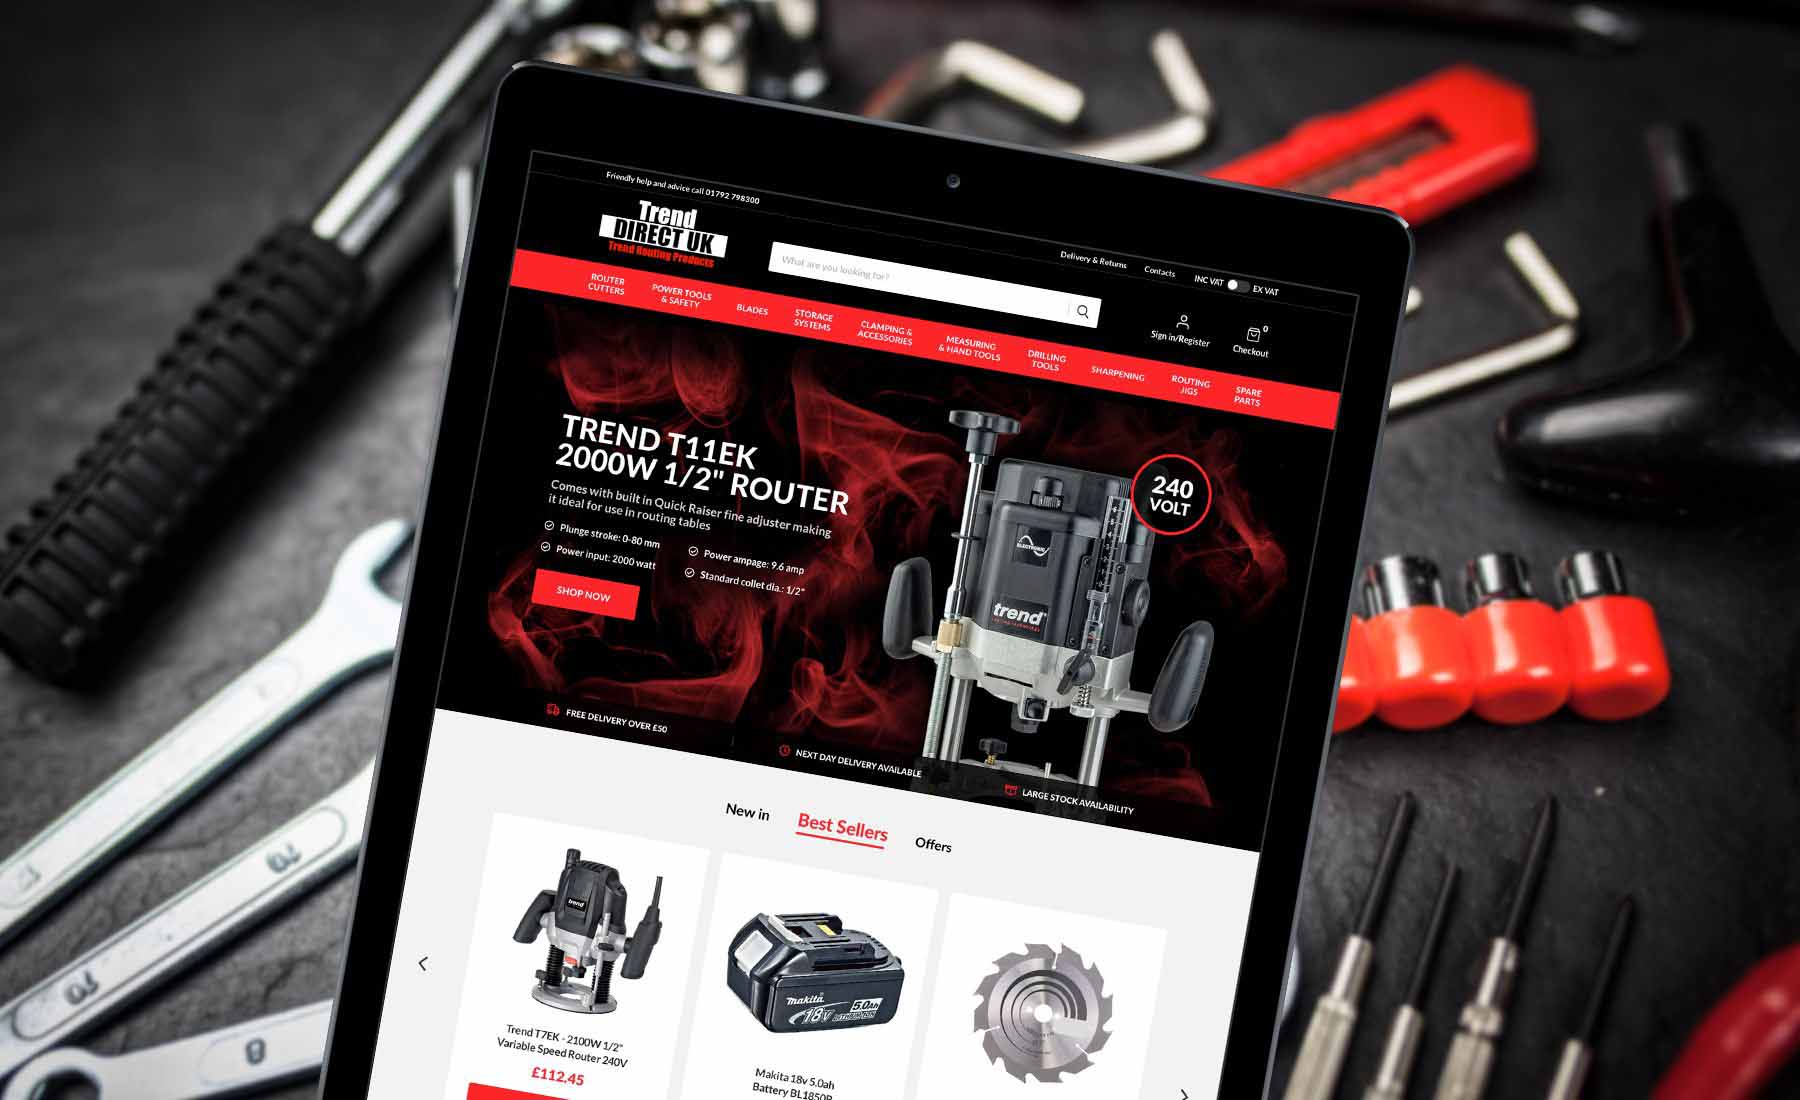 A new Magento 2 Website for Trend Direct UK